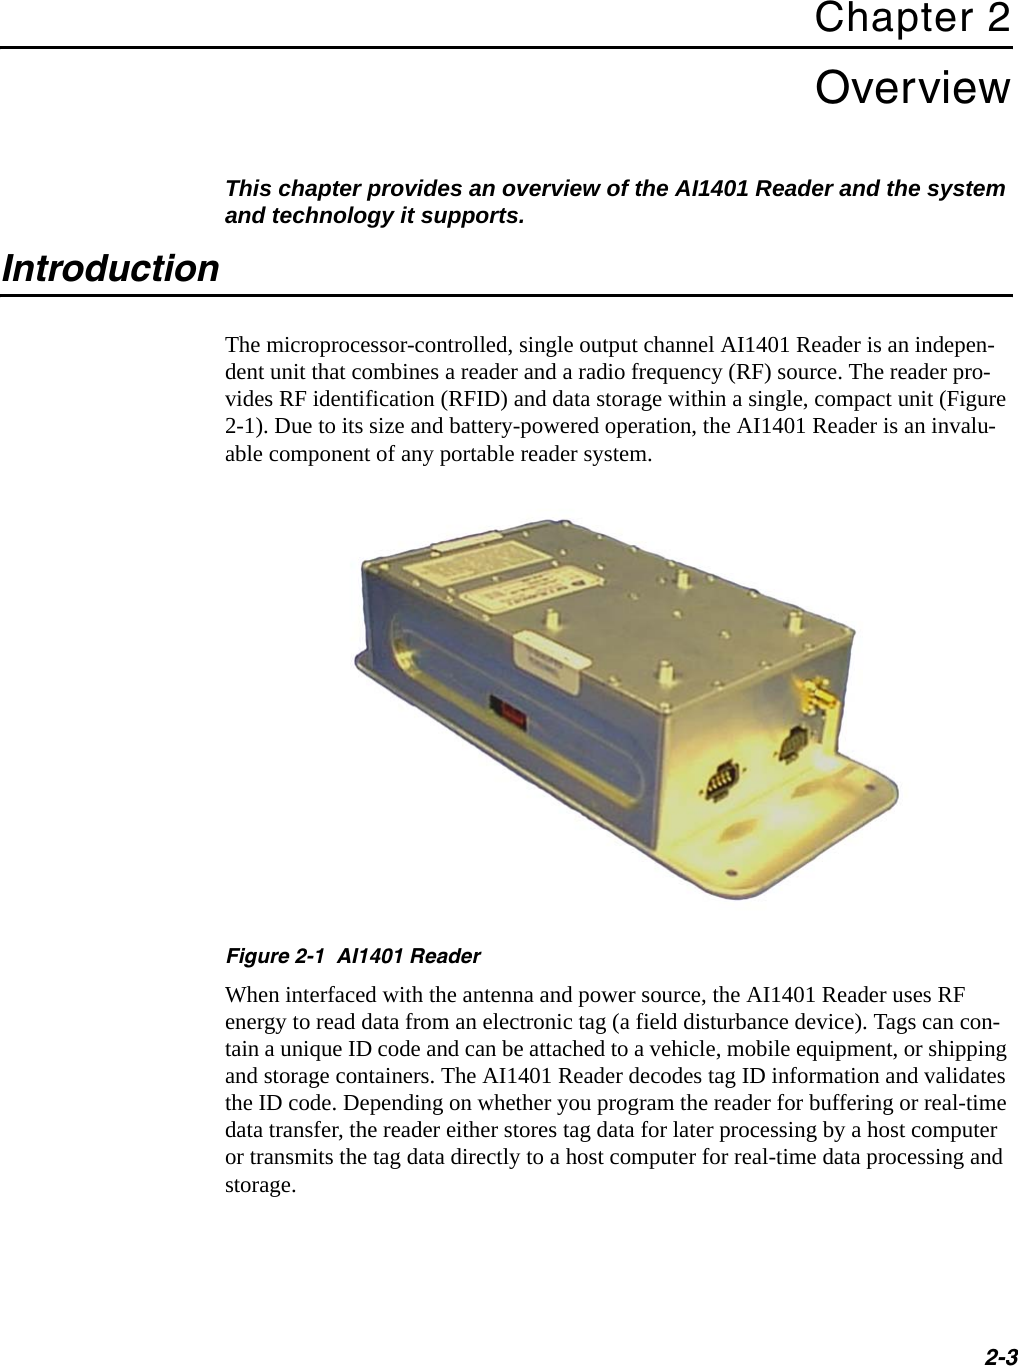 2-3Chapter 2OverviewThis chapter provides an overview of the AI1401 Reader and the system and technology it supports.IntroductionThe microprocessor-controlled, single output channel AI1401 Reader is an indepen-dent unit that combines a reader and a radio frequency (RF) source. The reader pro-vides RF identification (RFID) and data storage within a single, compact unit (Figure 2-1). Due to its size and battery-powered operation, the AI1401 Reader is an invalu-able component of any portable reader system.Figure 2-1  AI1401 ReaderWhen interfaced with the antenna and power source, the AI1401 Reader uses RF energy to read data from an electronic tag (a field disturbance device). Tags can con-tain a unique ID code and can be attached to a vehicle, mobile equipment, or shipping and storage containers. The AI1401 Reader decodes tag ID information and validates the ID code. Depending on whether you program the reader for buffering or real-time data transfer, the reader either stores tag data for later processing by a host computer or transmits the tag data directly to a host computer for real-time data processing and storage.